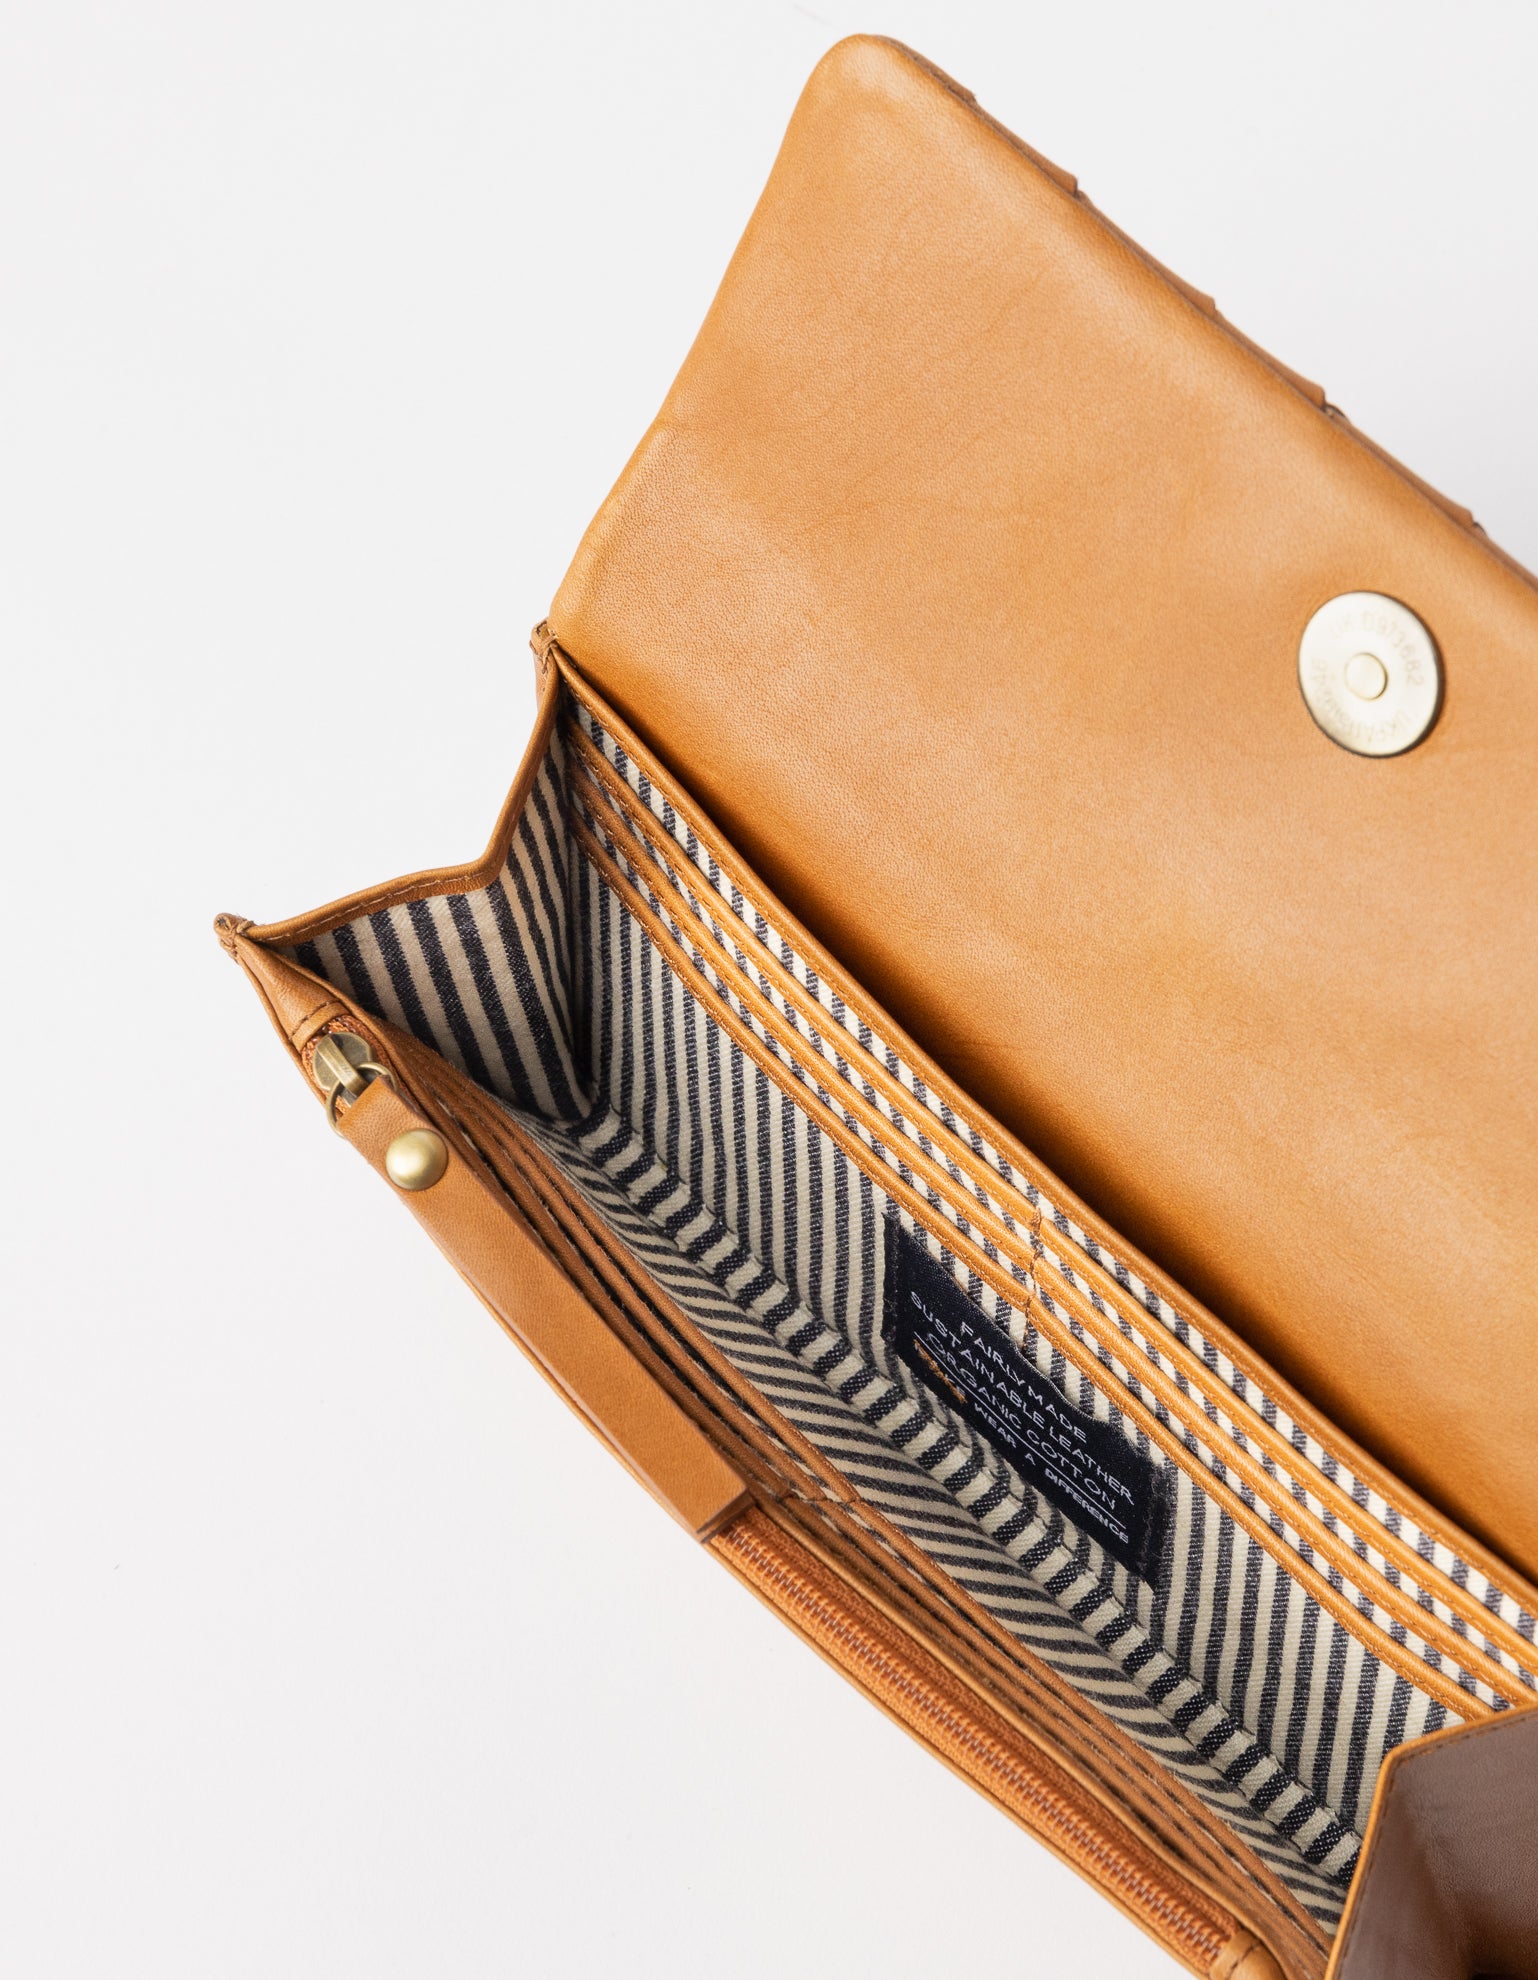 Woven Leather wallet - Inside product image